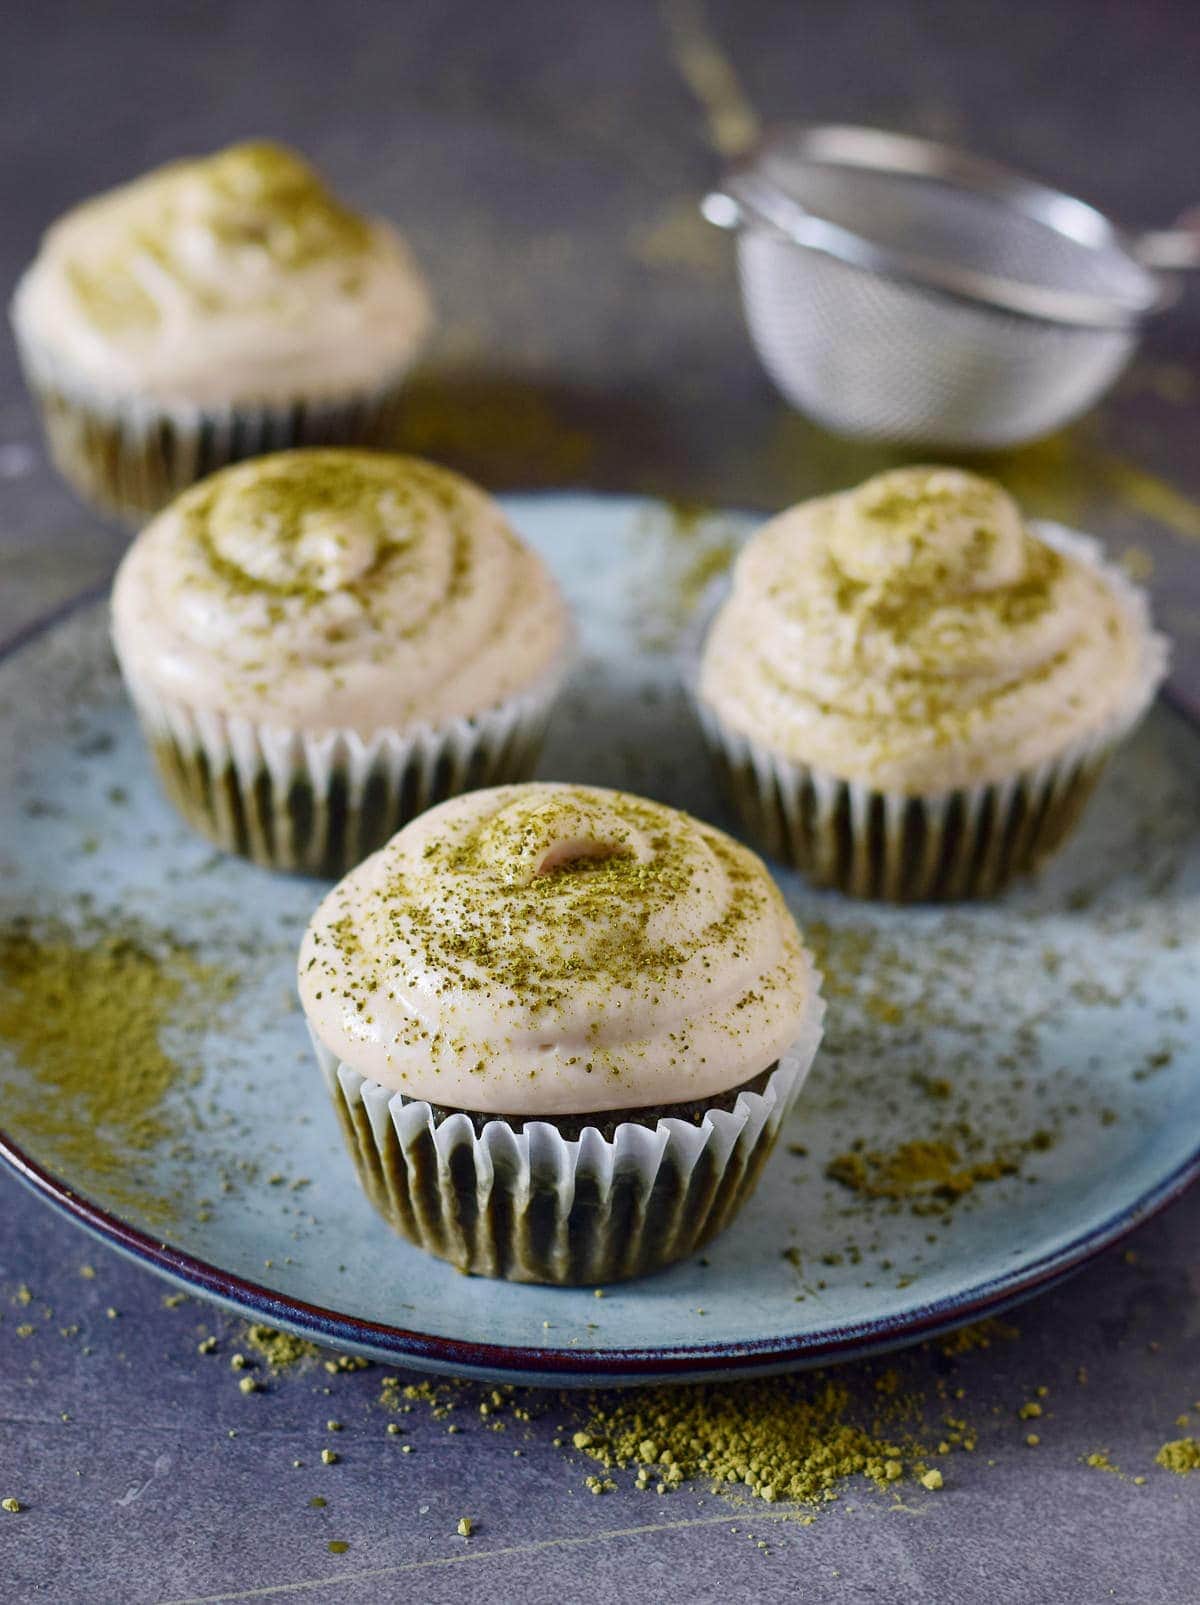 3 matcha cupcakes with white frosting sprinkled with green powder